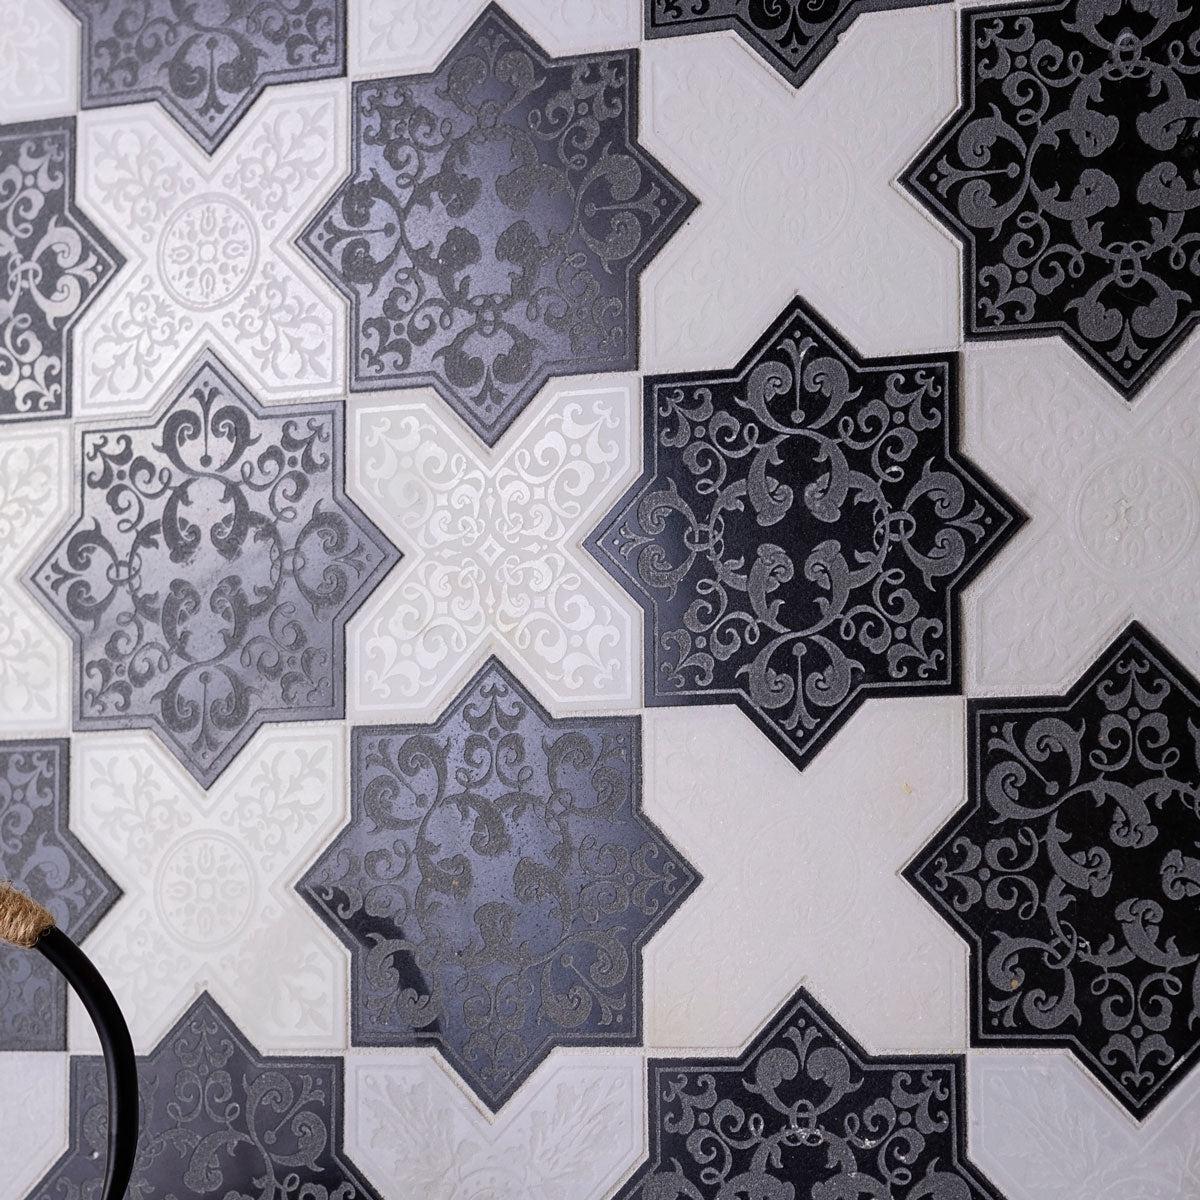 Moroccan Black Star & White Cross Etched Marble Mosaic Tile